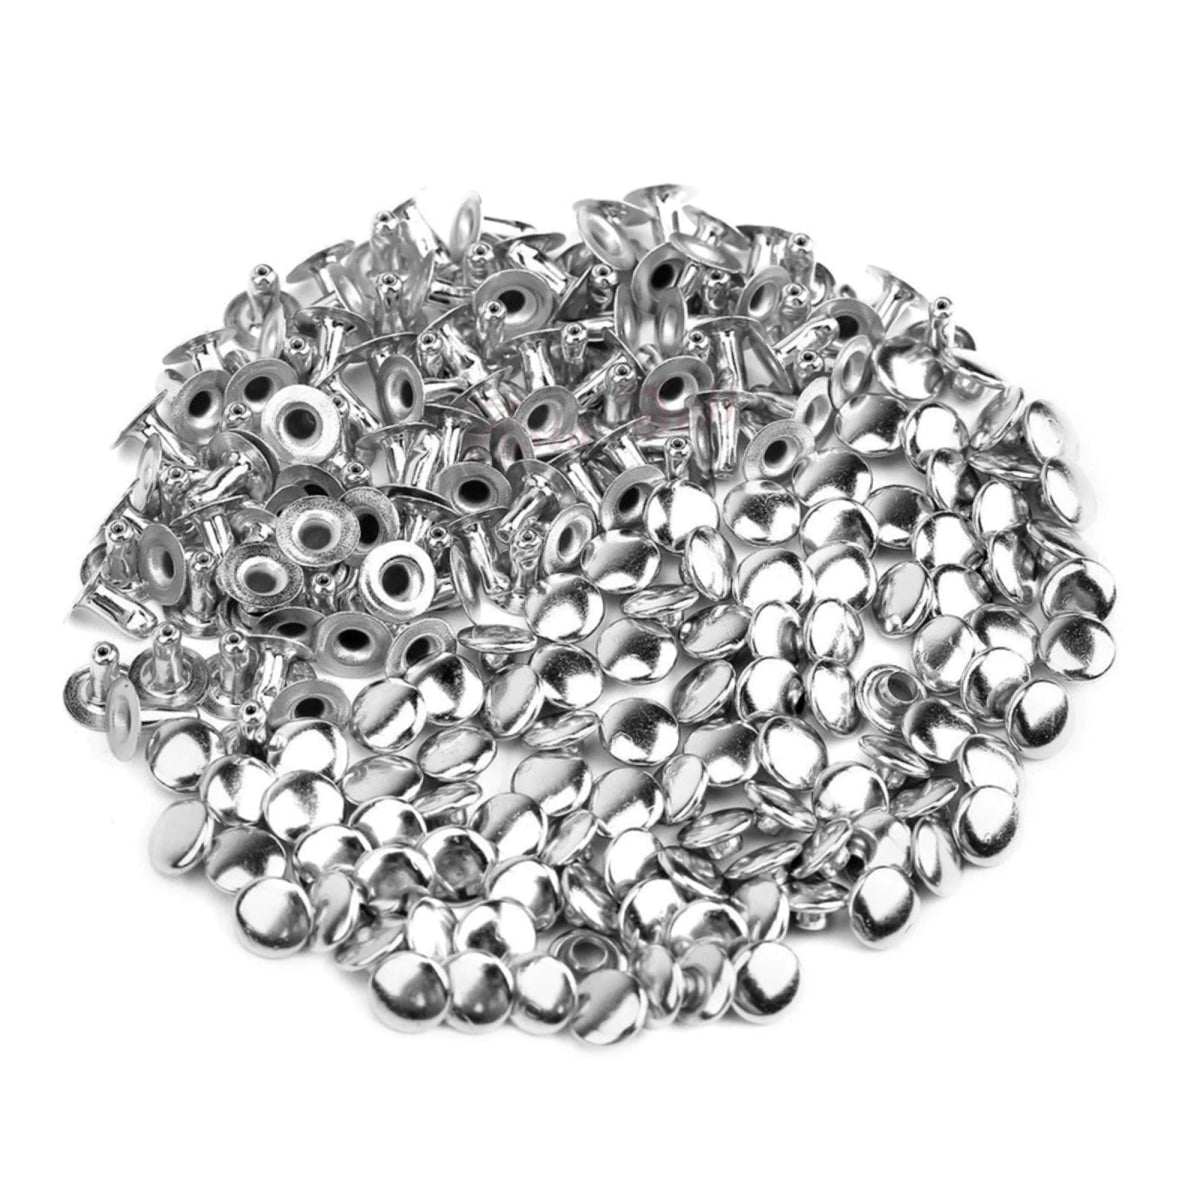 10-500 Sets 3-7mm Round Silver Metal Rivets DIY Clothes Shoes Eyelets DIY Leather Craft Clothing - 10 Pairs 3mm Silver - - Asia Sell